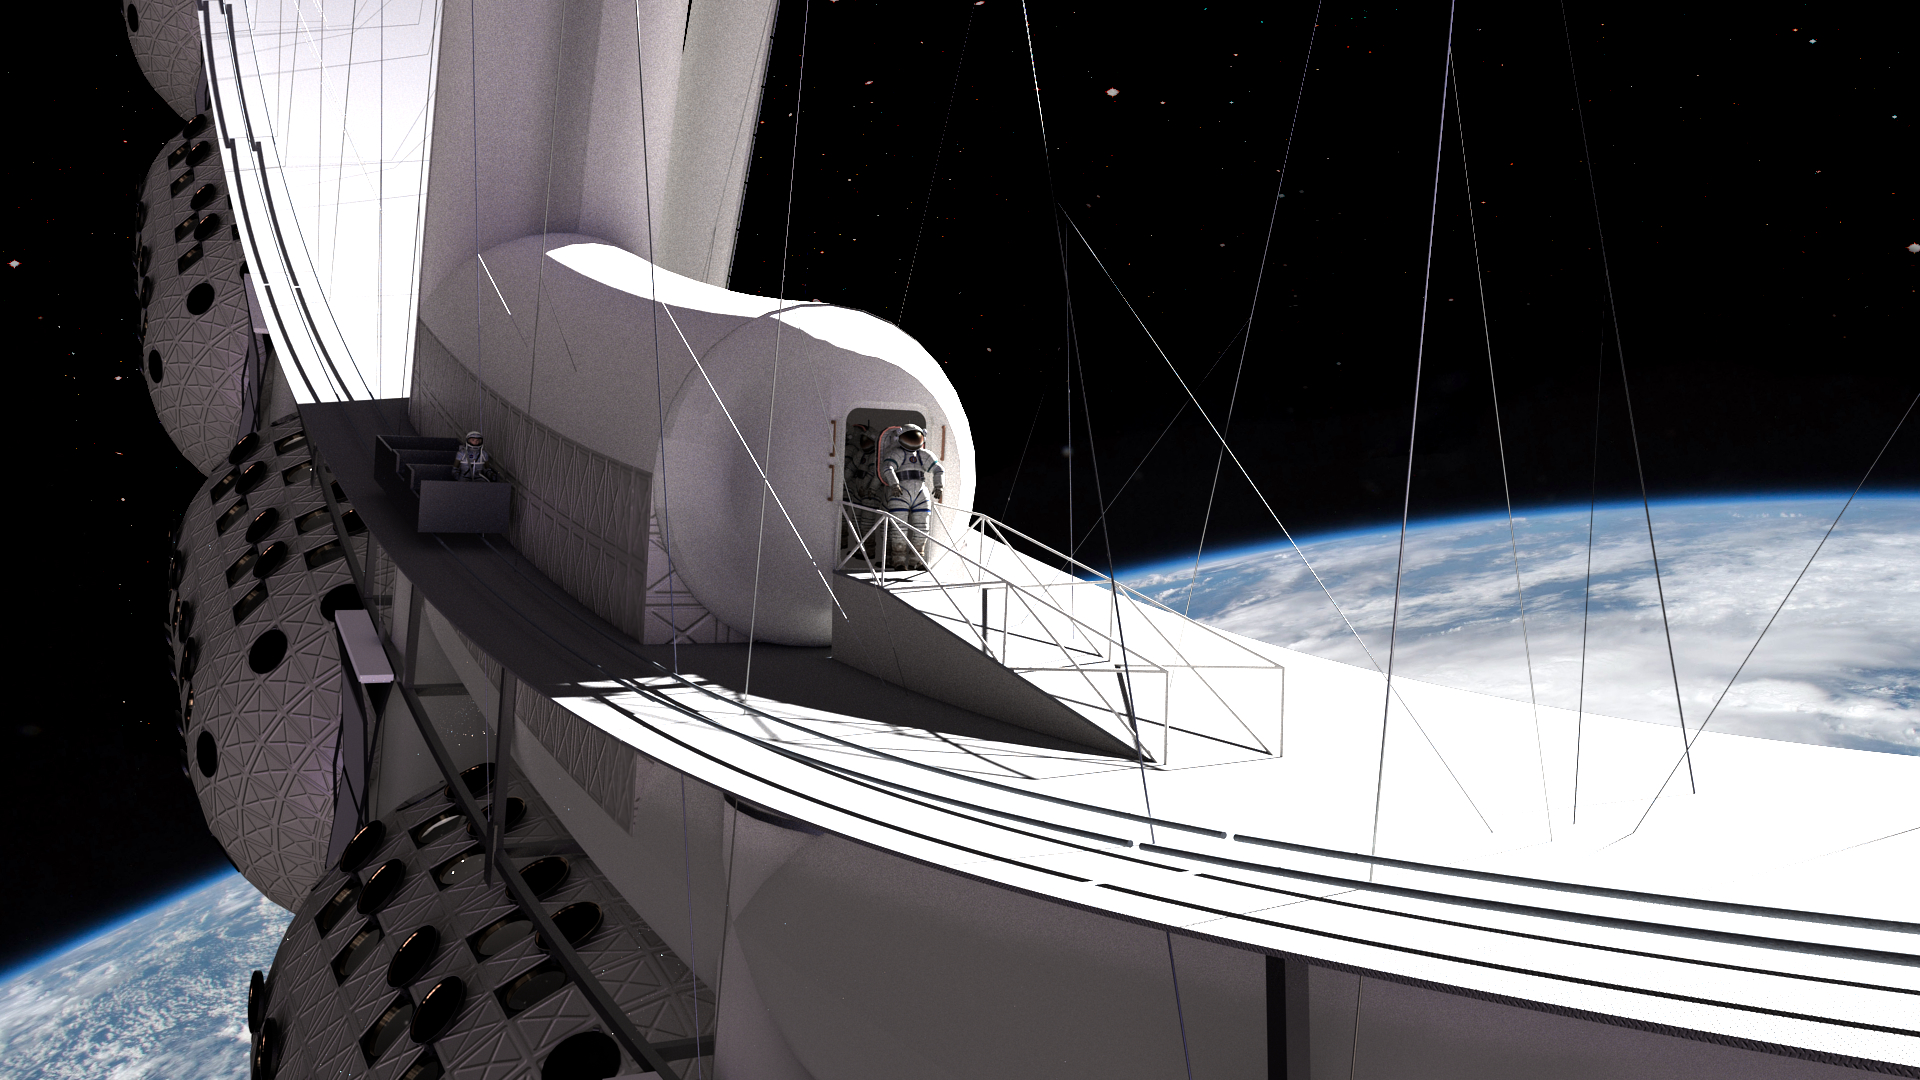 Orbital Assembly Corp. hits $1M fundraising goal, aims to have luxury space hotel open in 2027